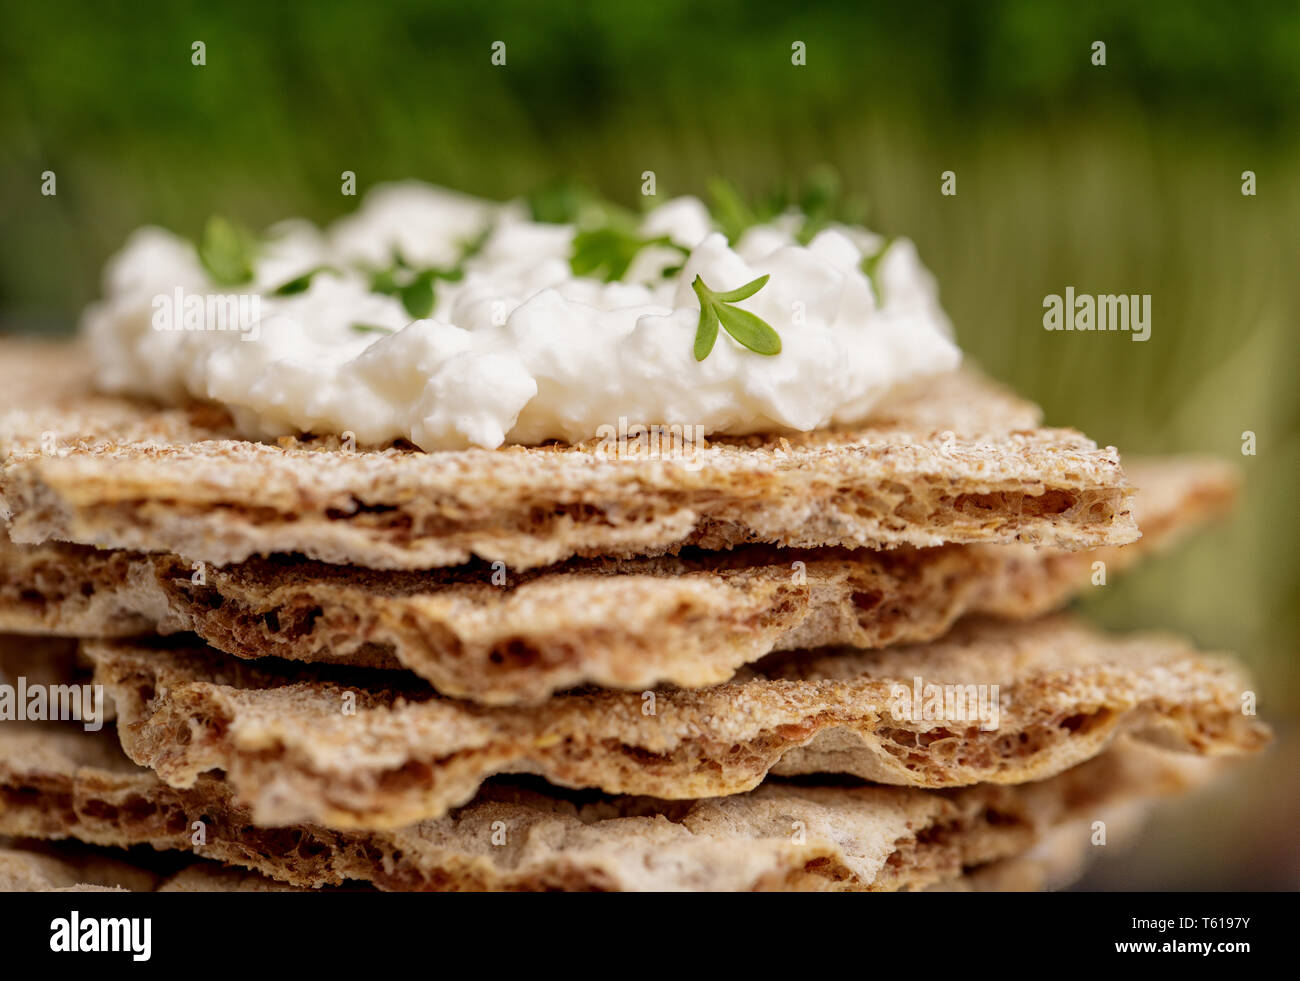 Crispbread with Cottage Cheese and Garden Cress Stock Photo